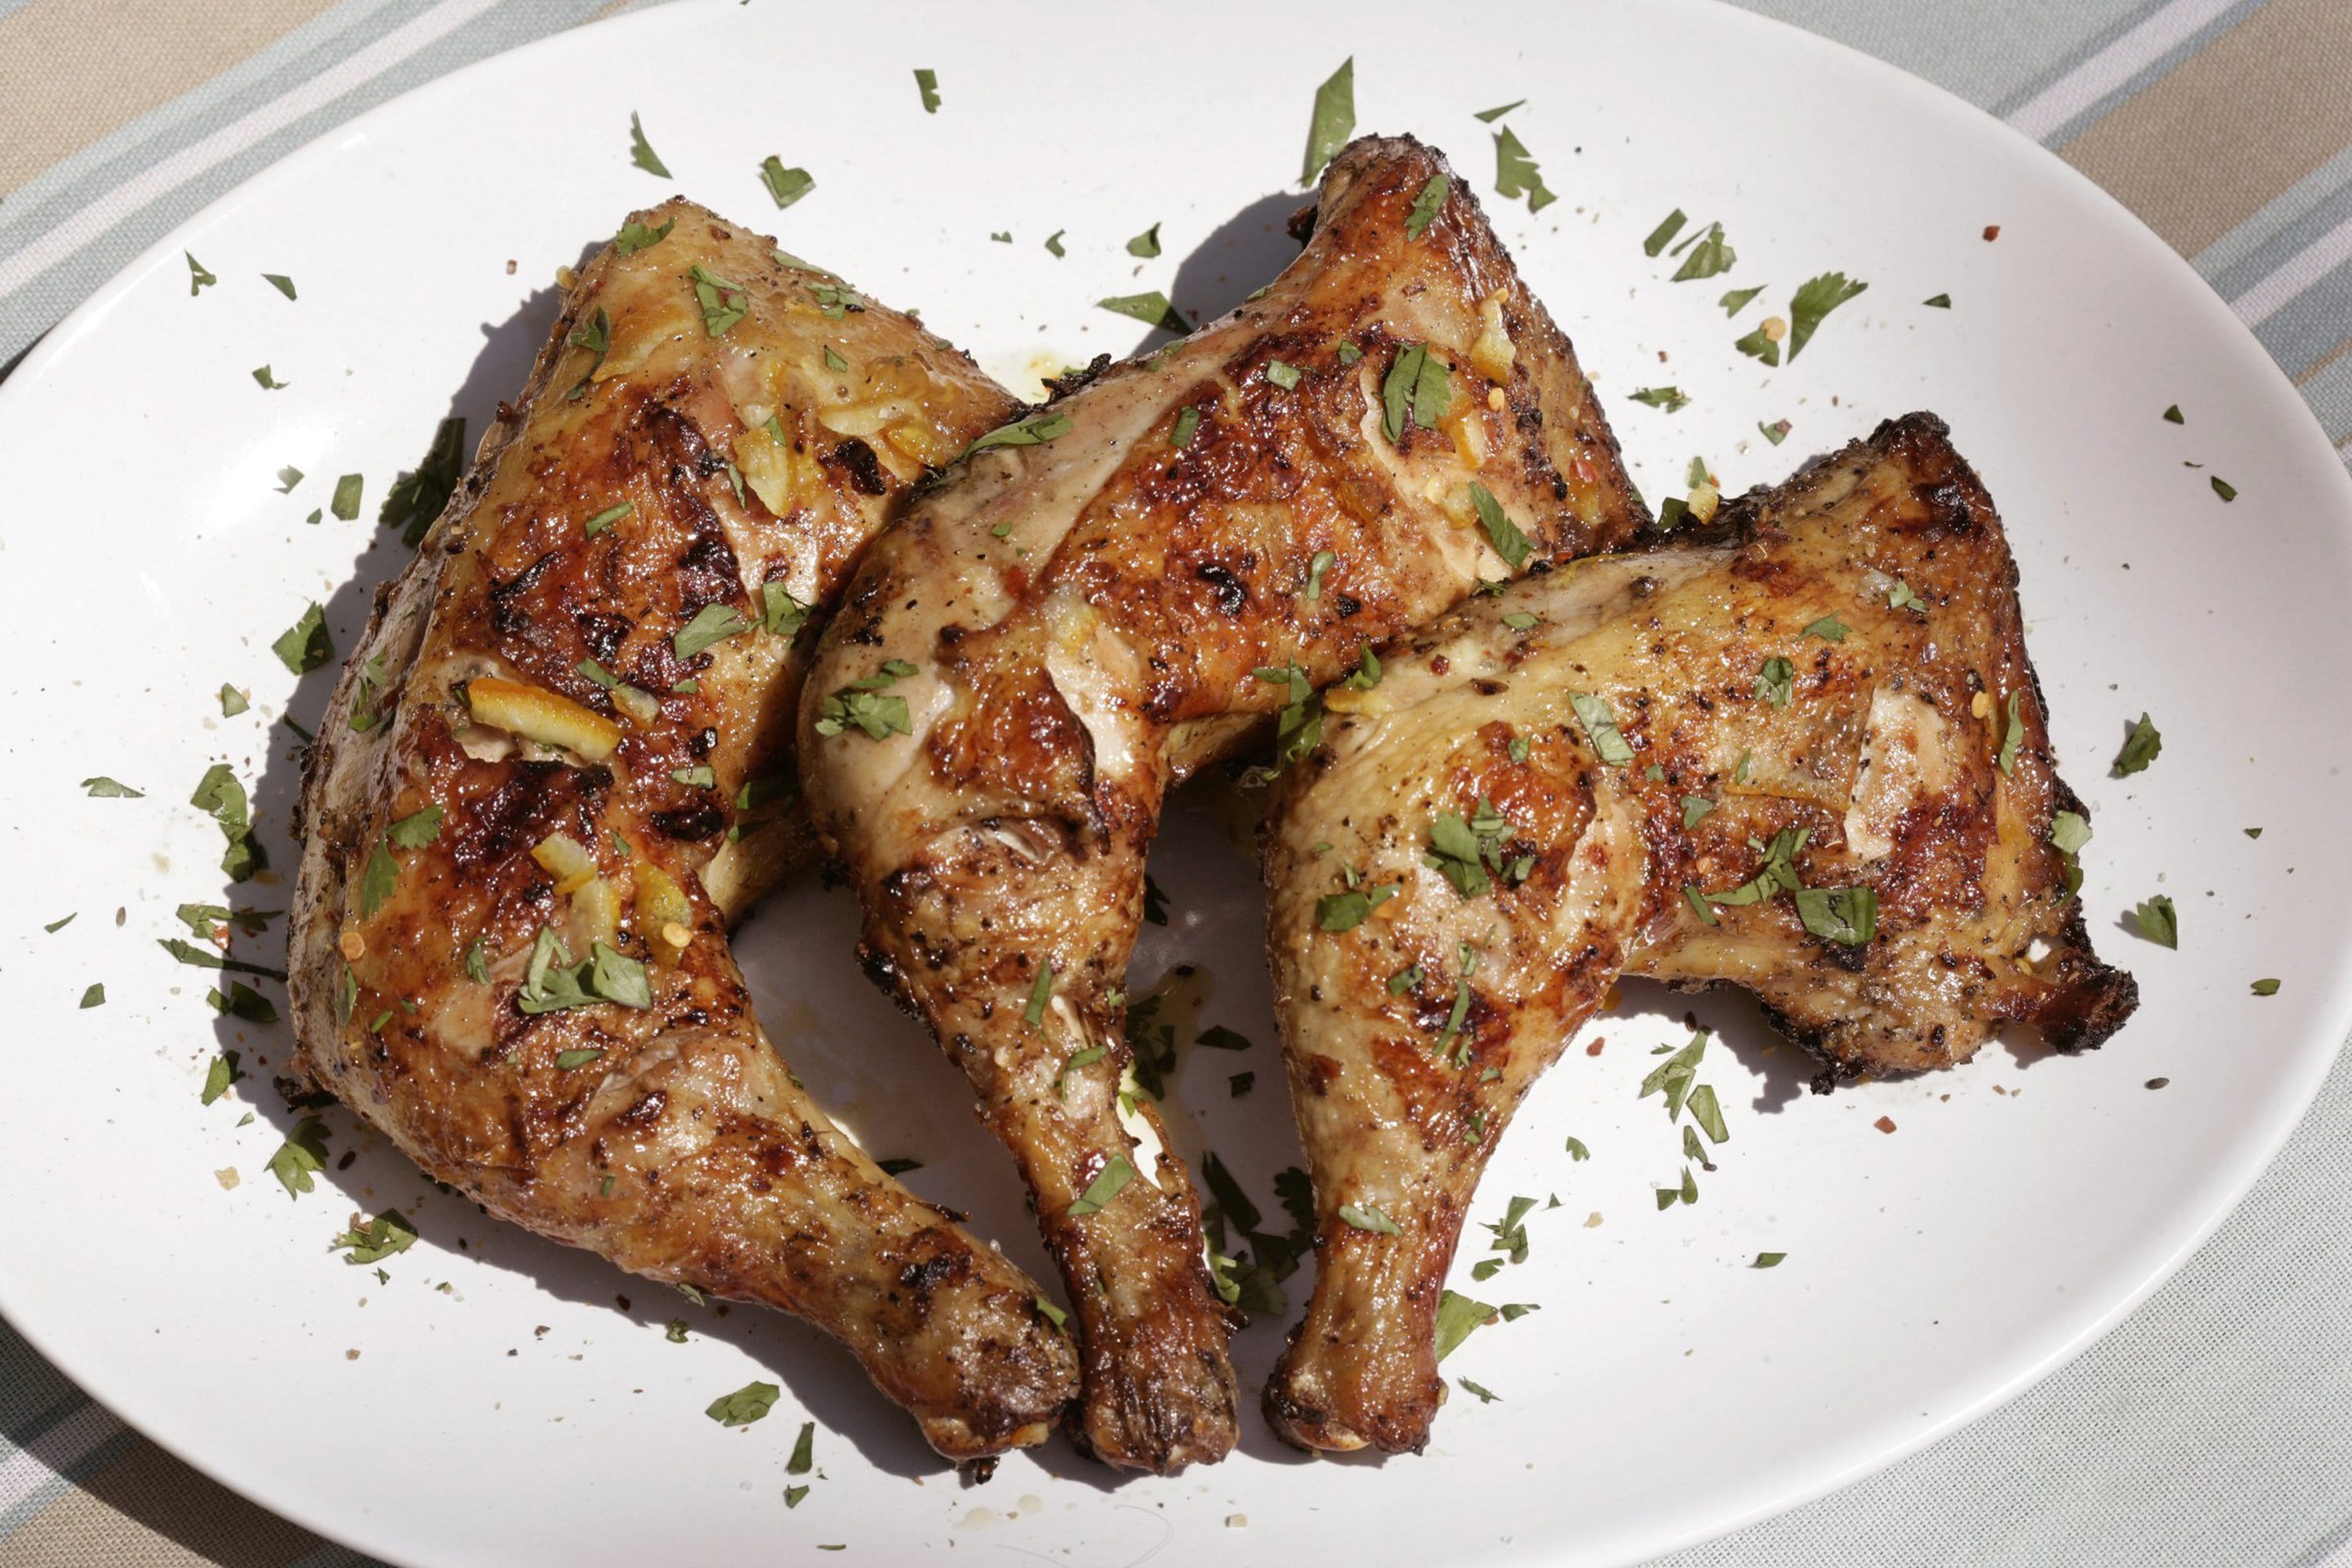 Using two heat zones on the grill is key to preparing bone-in chicken legs such as these spicy garlic chicken leg quarters.